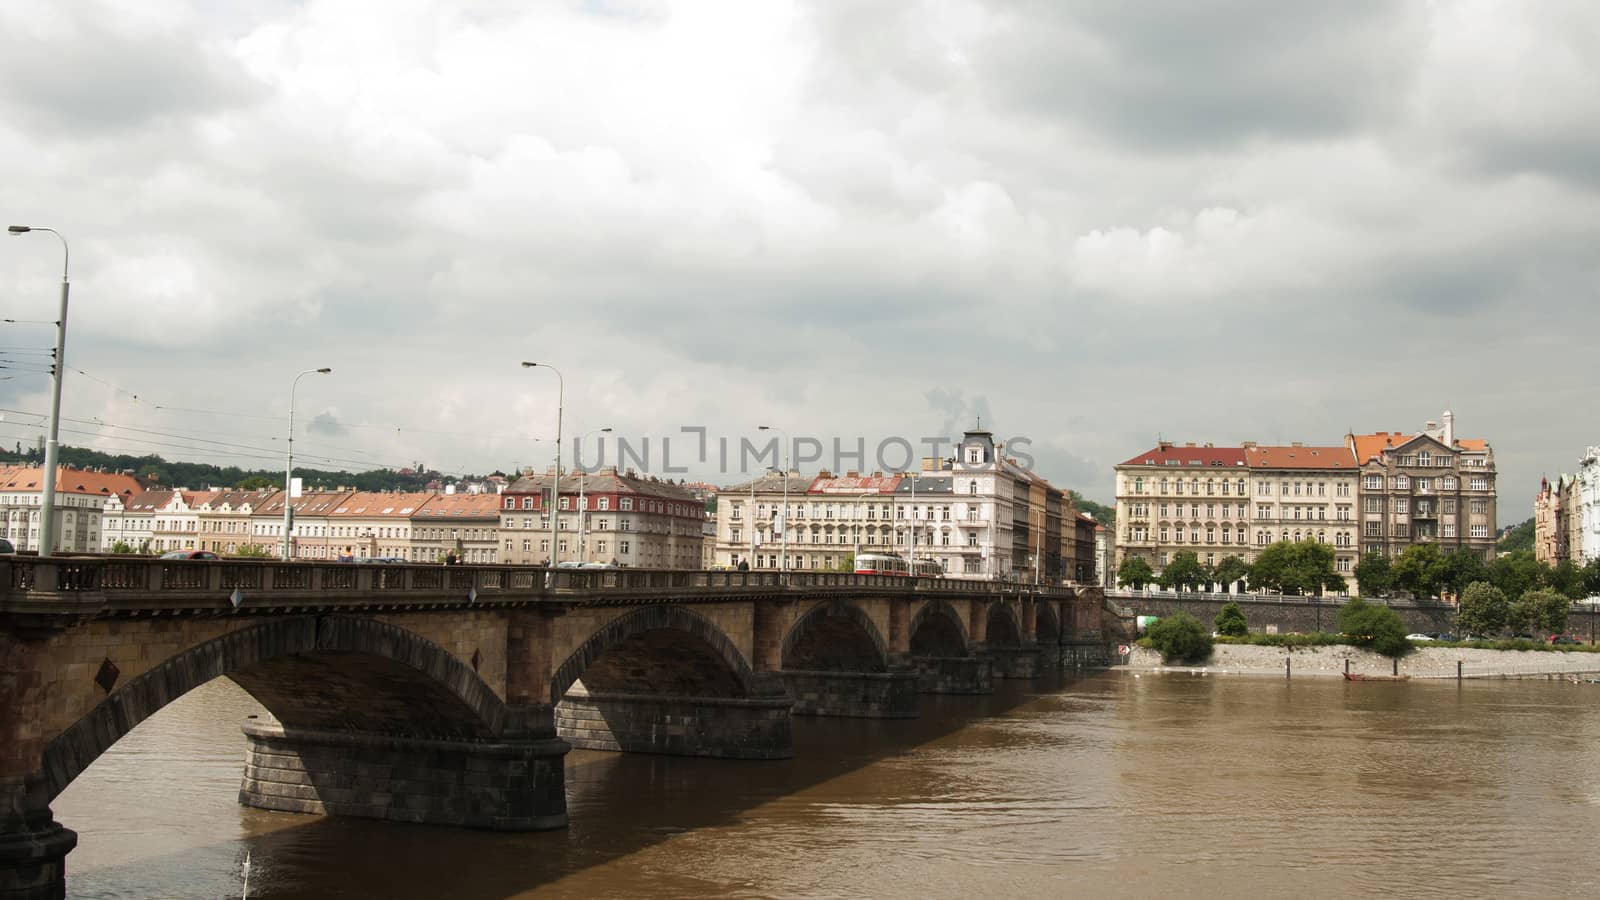 The Palacky Bridge (1876) is a bridge in Prague. It is one of the oldest functioning bridges over the Vltava in Prague after the Charles Bridge. Designed by Rowland Mason Ordish.